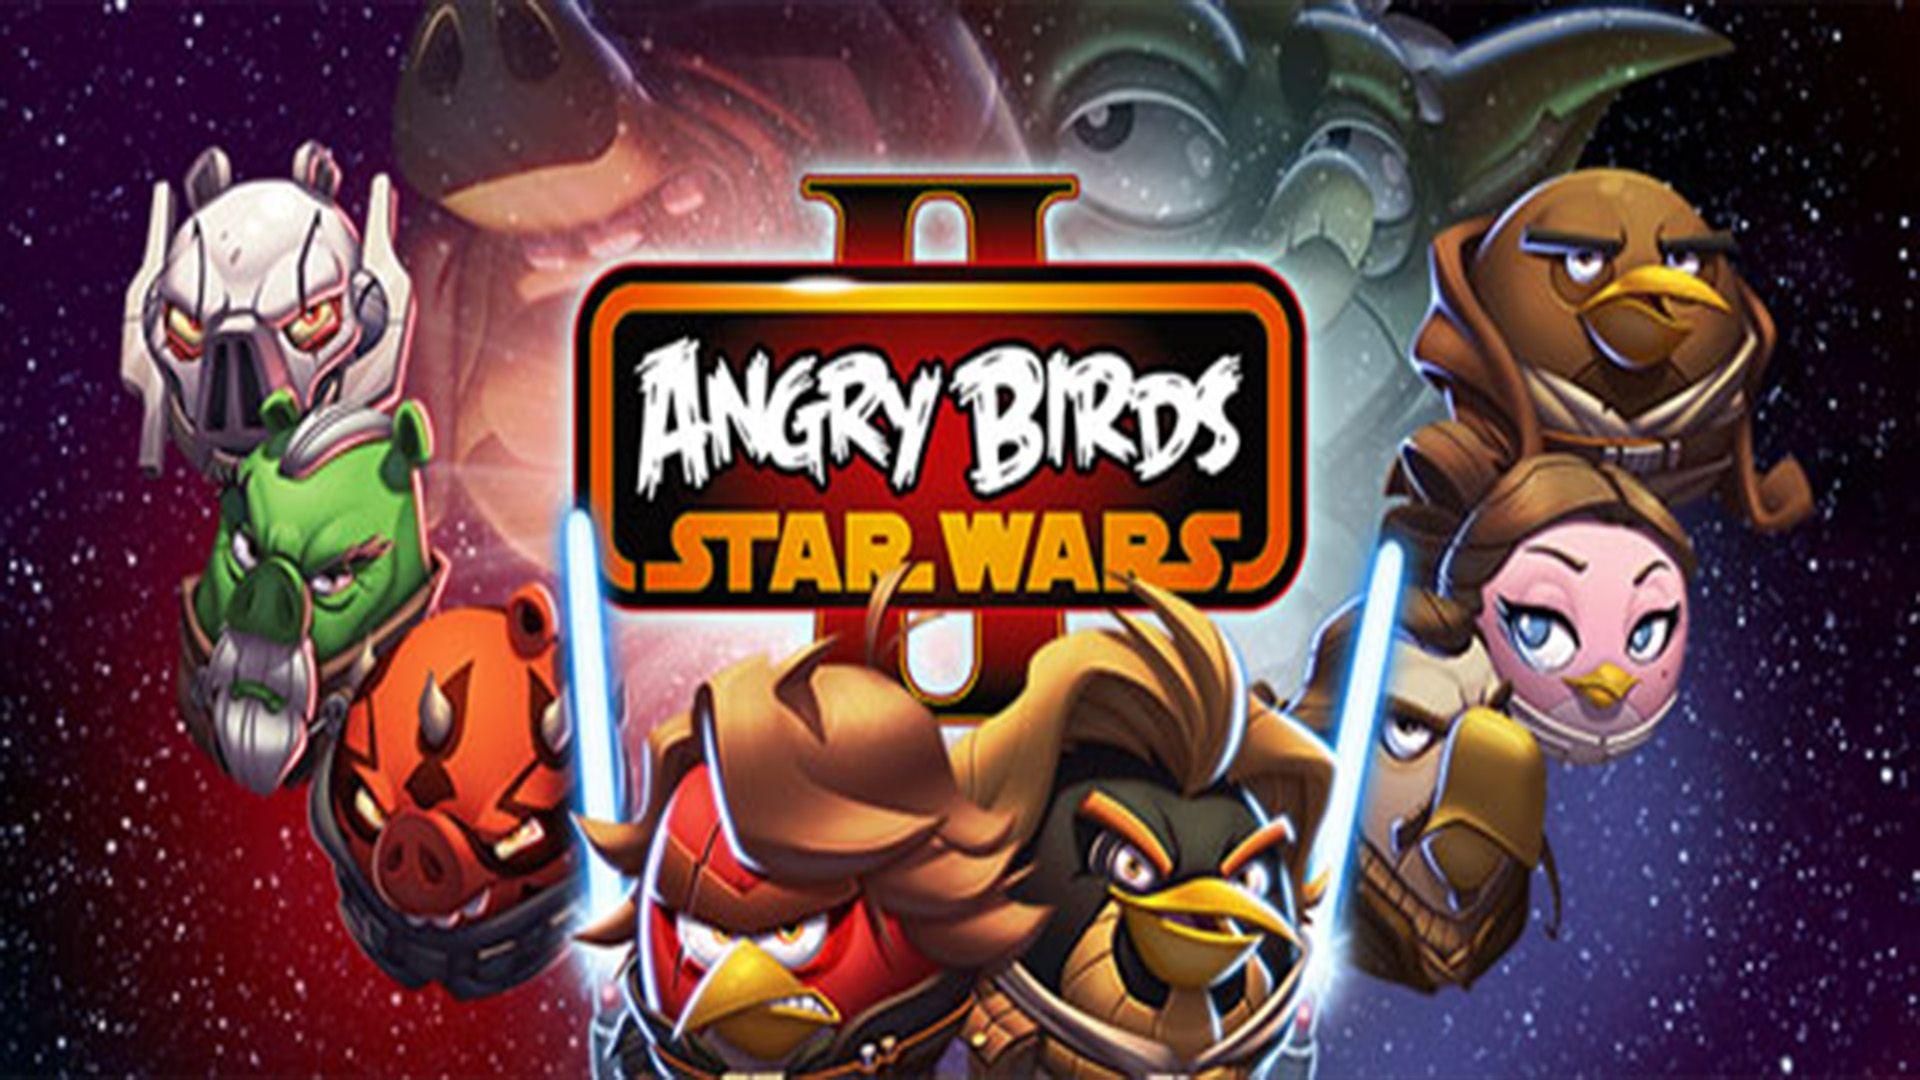 Angry Birds: Star Wars 2 Full HD Wallpapers and Backgrounds Image.